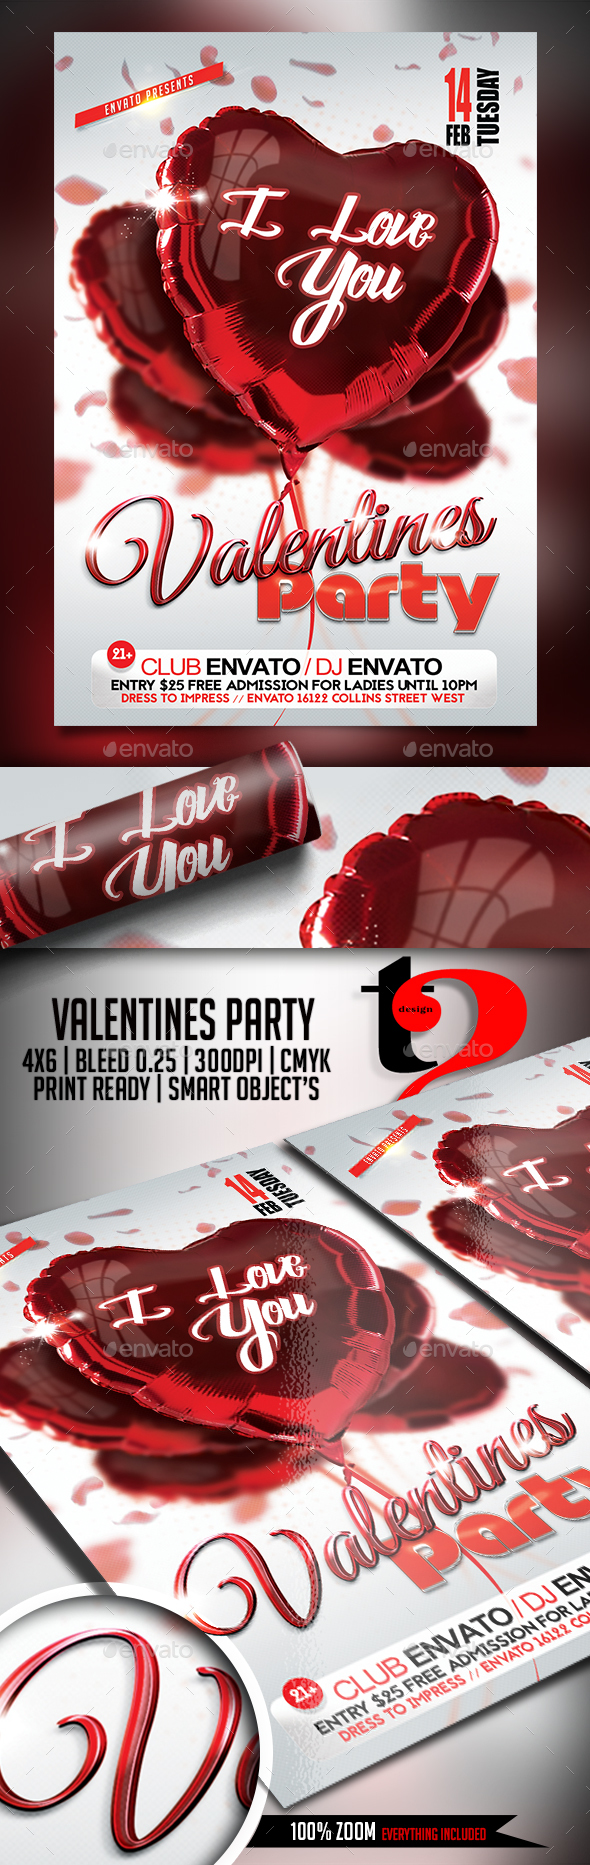 Valentines Party Flyer - Template